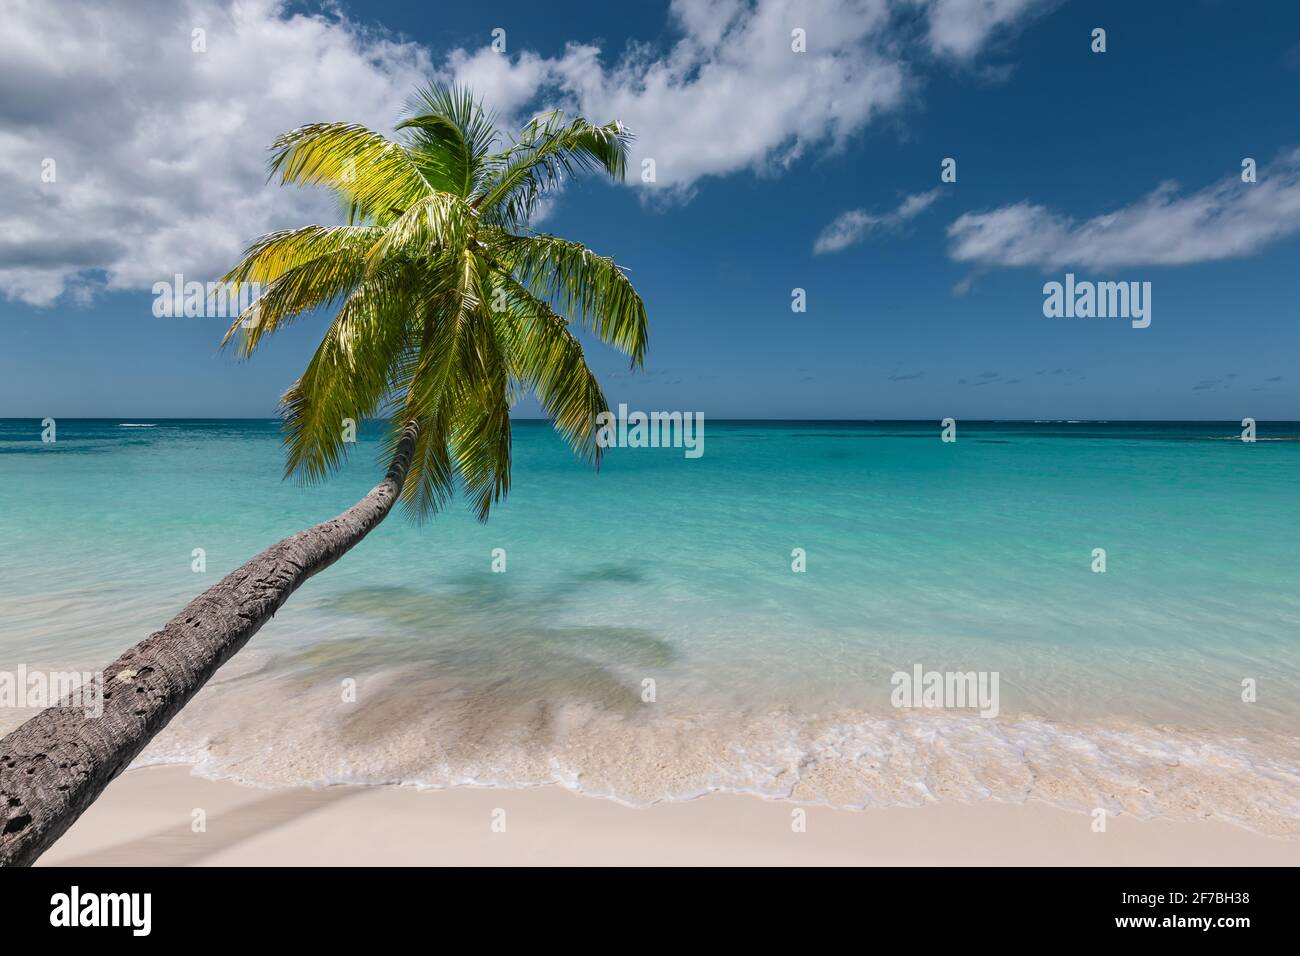 Breathtaking tropical beach with swaying palm tree. Stock Photo